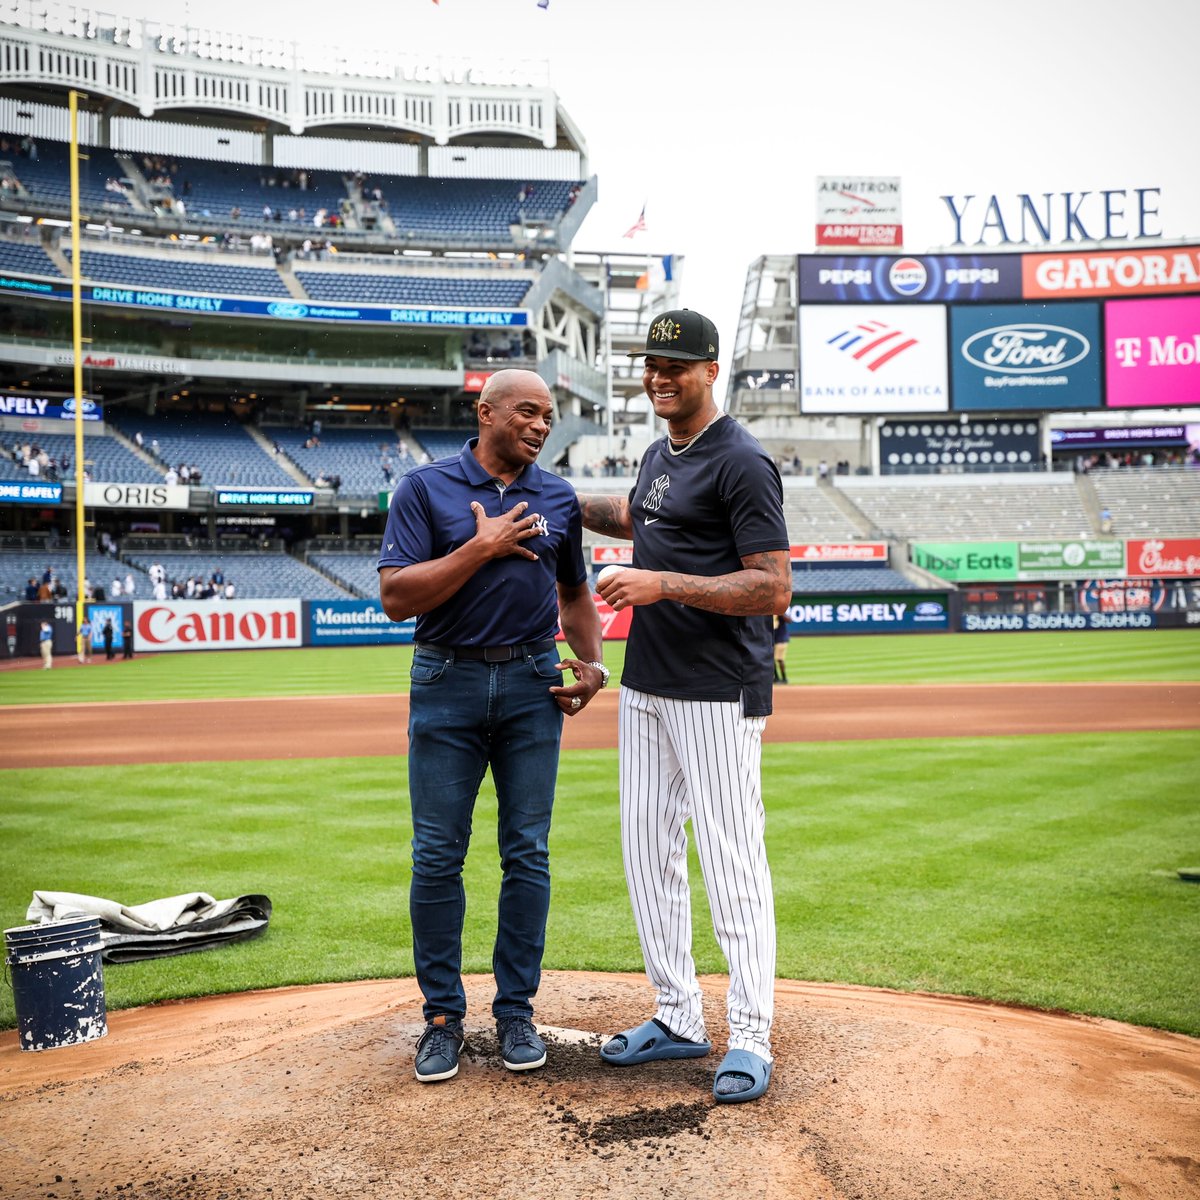 Today, Luis Gil recorded 14 strikeouts, a Yankees single-game rookie record. Who held that record before him? 

El Duque -- who just so happened to throw out today's ceremonial 1st pitch.

Baseball is the Best.